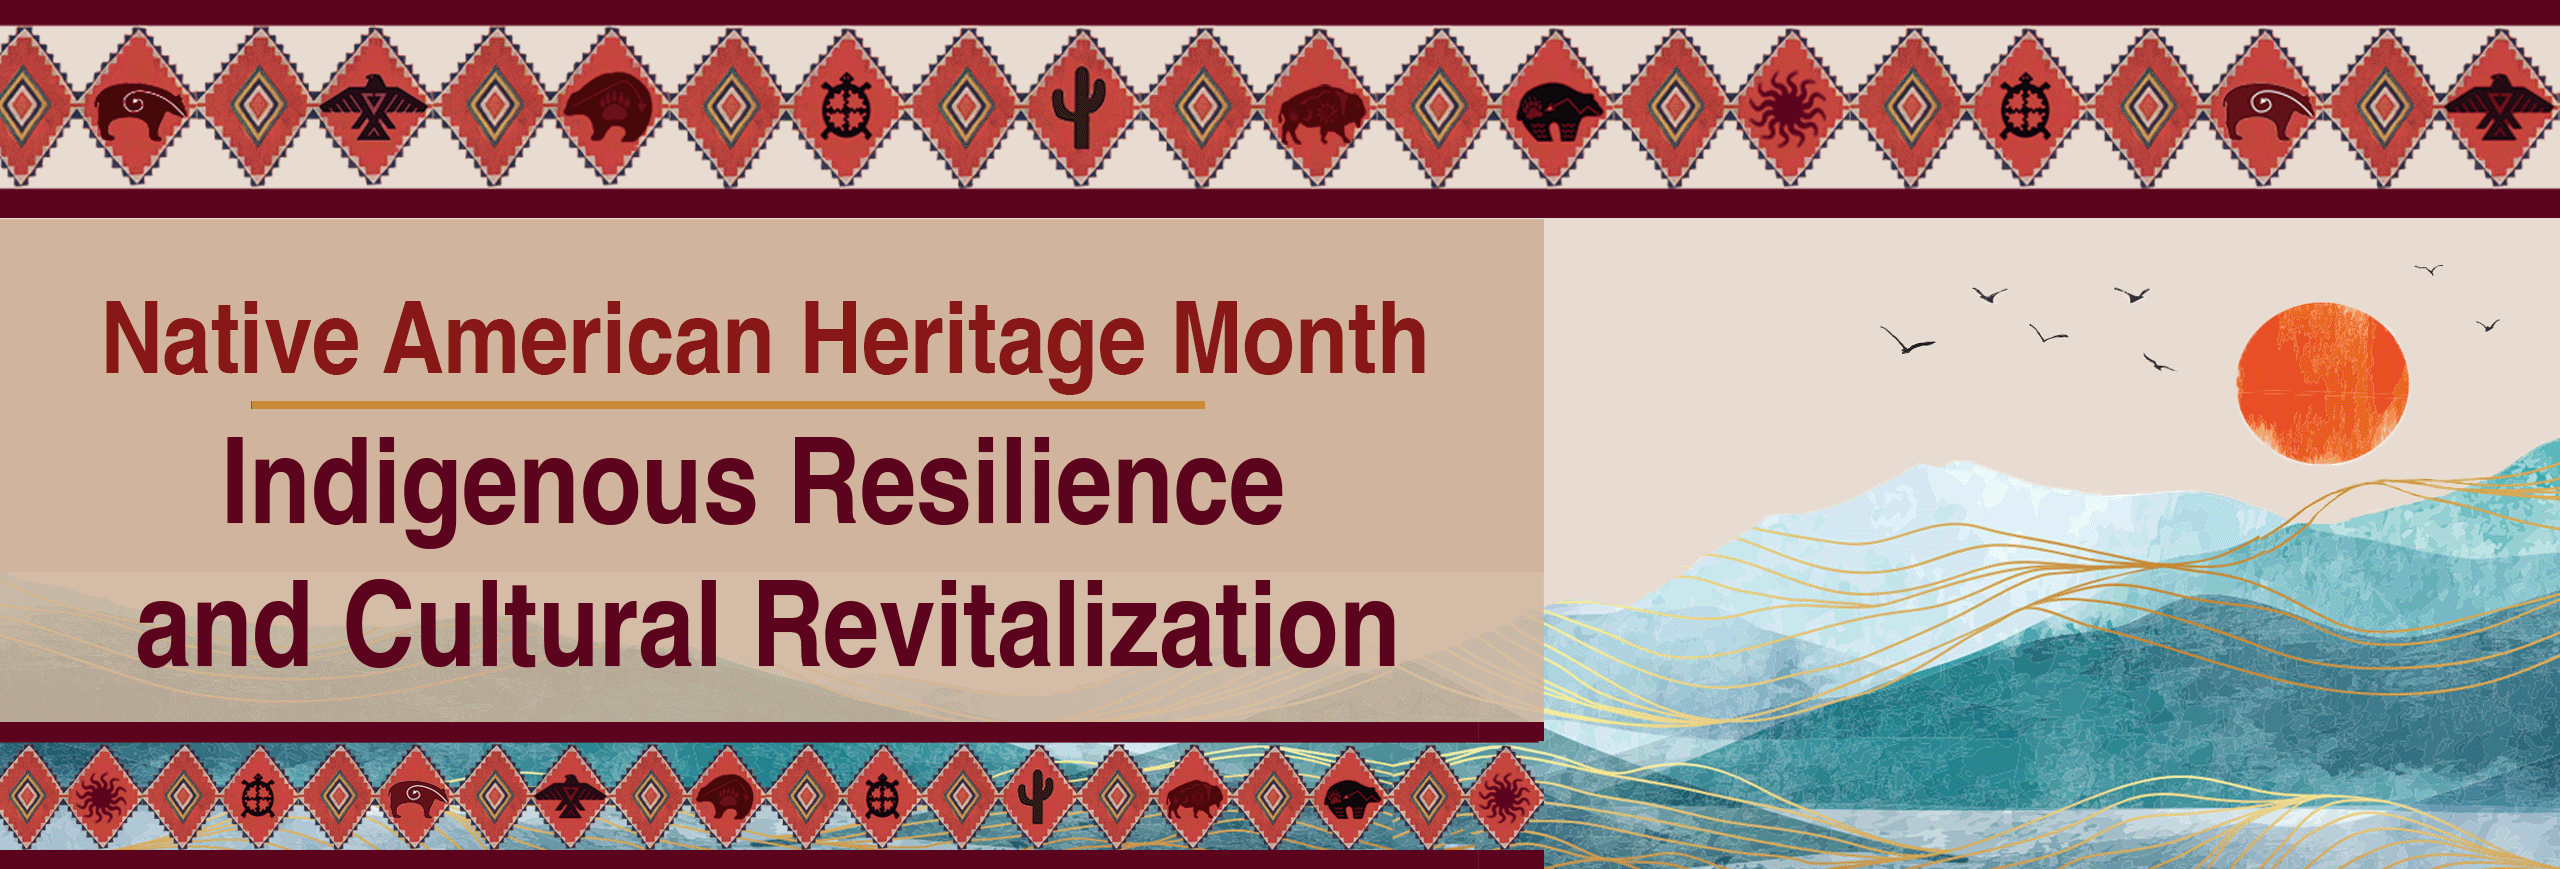 Native American Heritage Month 2023 campaign artwork features a Navajo design and prevalent Native American symbols from the recognized tribes such as the Bear, Sun, Turtle, Eagle, Cactus, and Buffalo, each symbolizing the strength, courage, and resiliency of the Native American community.  